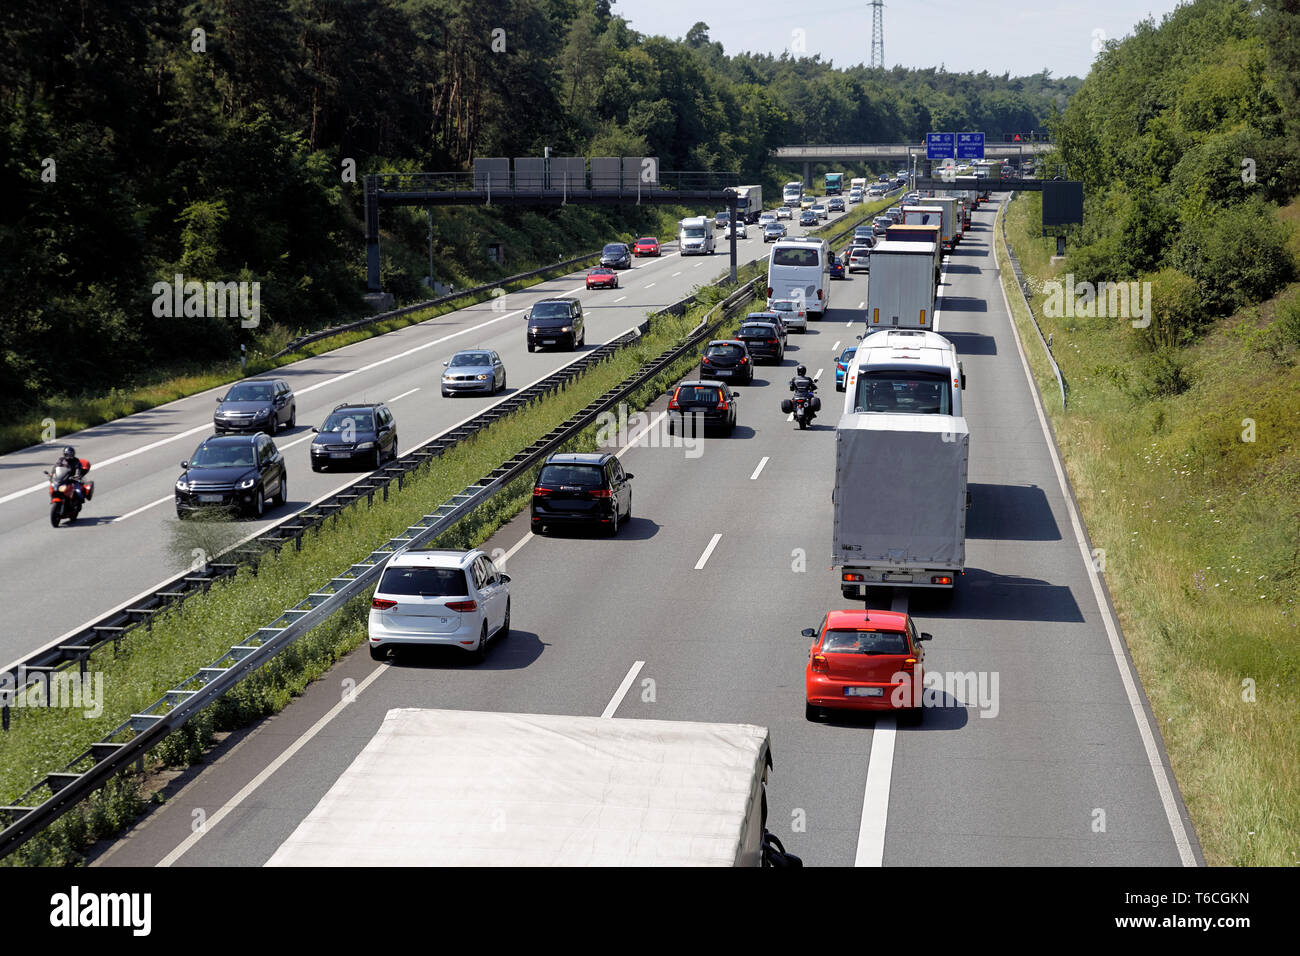 traffic jam on a highway in germany Stock Photo